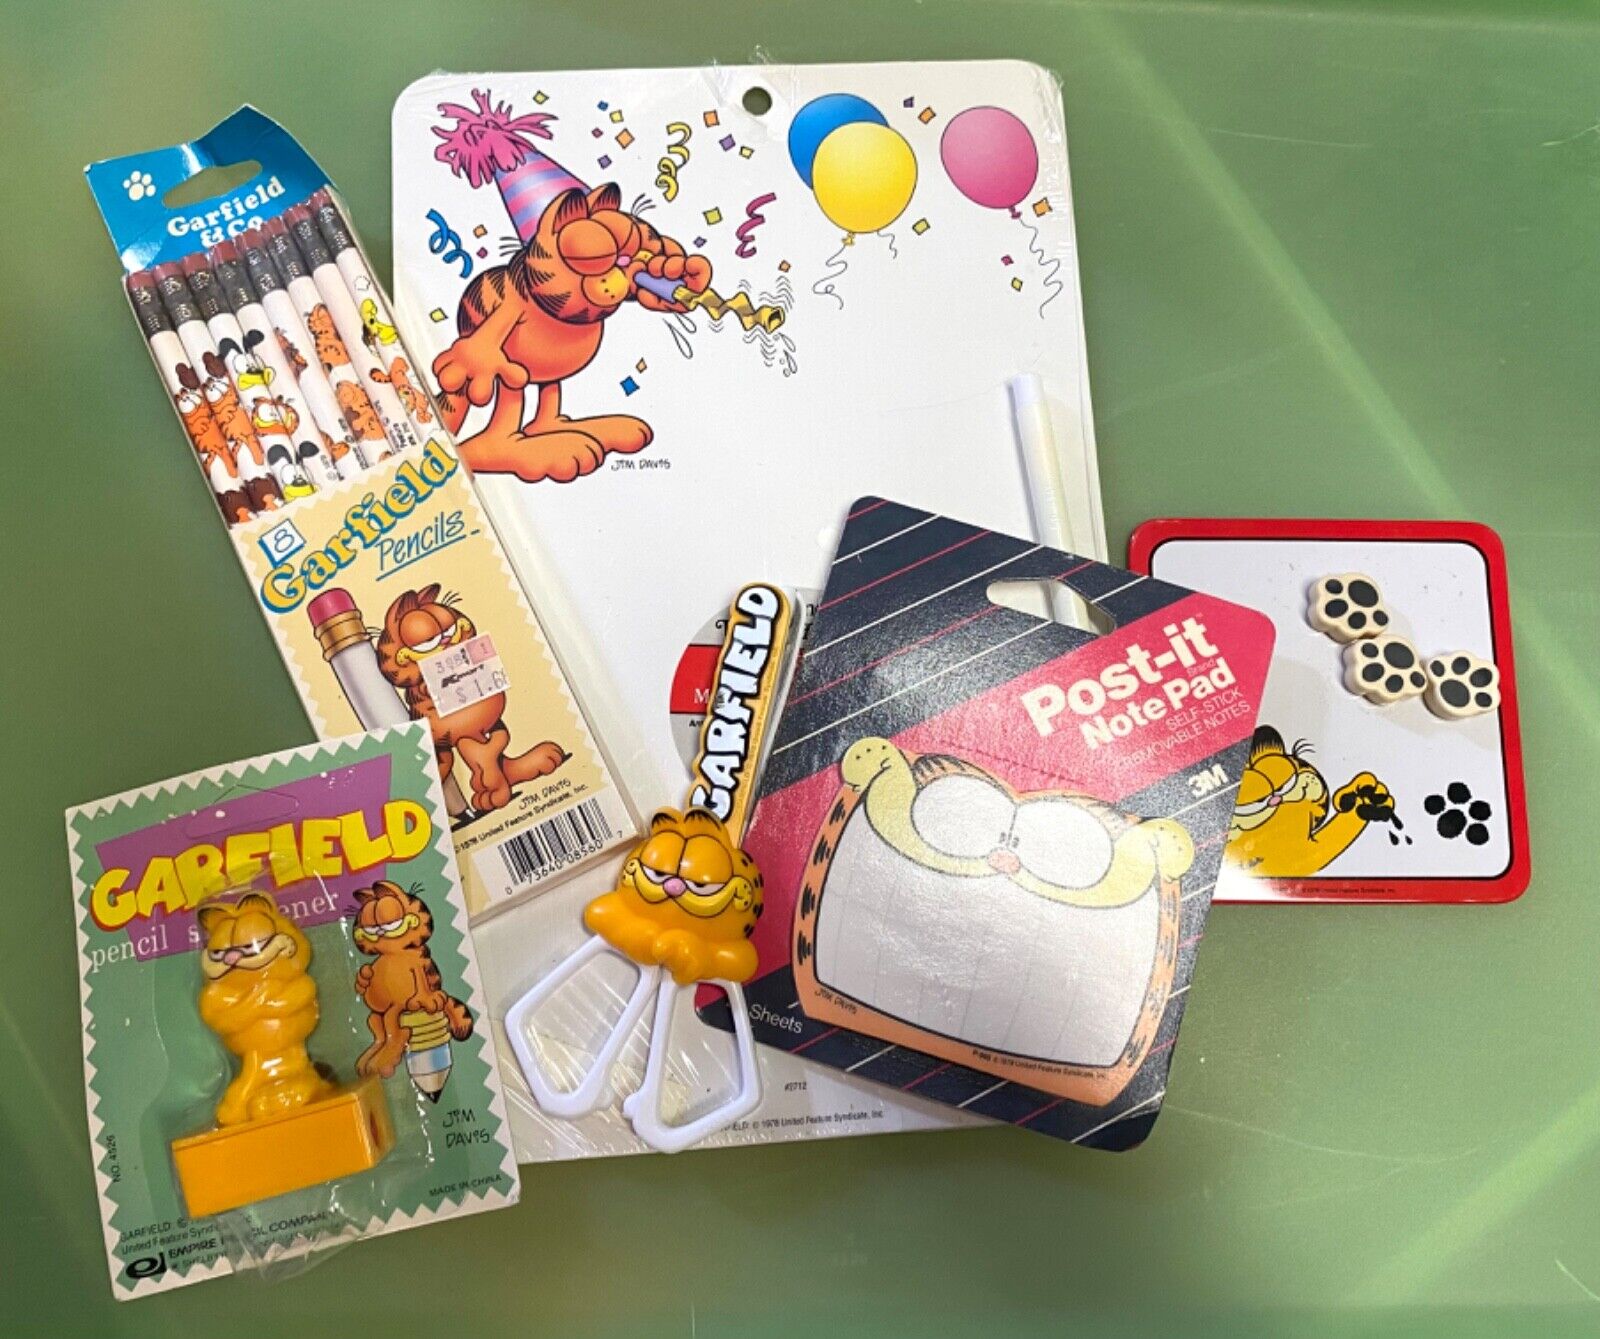 Vintage Garfield items, pencils and more